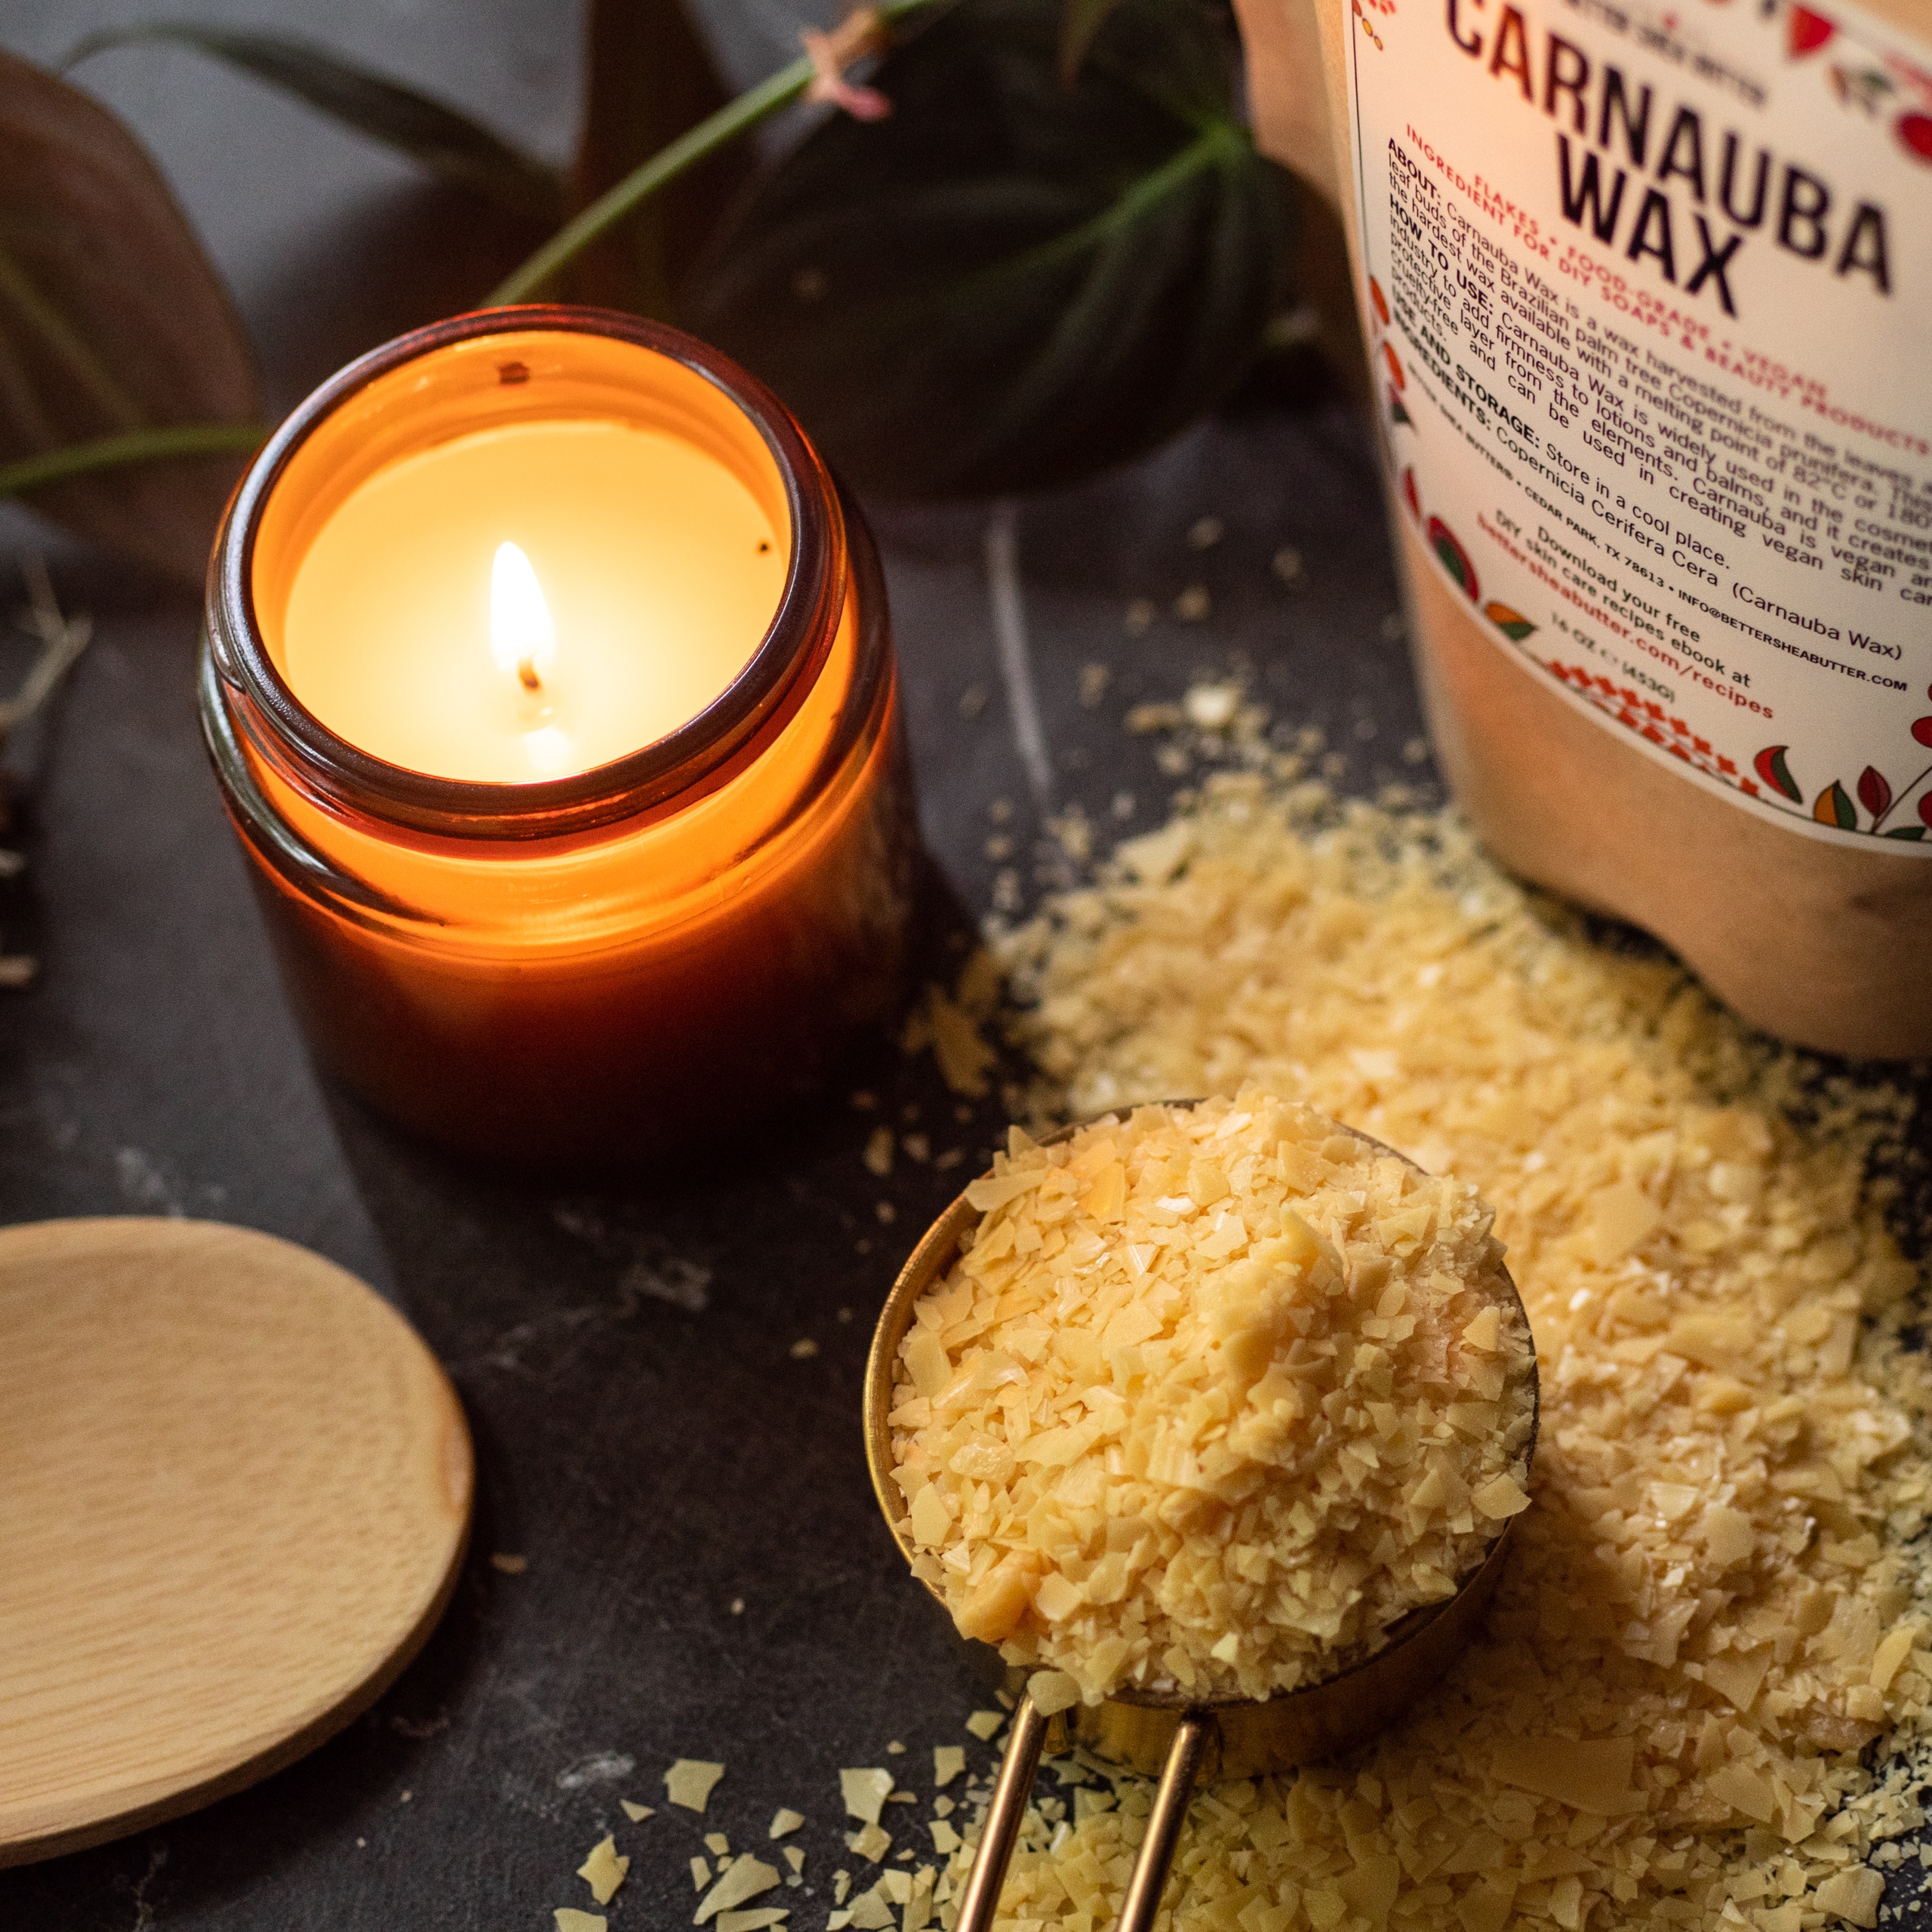 Natural Oils, Butters, Clays, Wholesale Soaps on Instagram: Carnauba Wax-  New Product Carnauba Wax is a vegetable wax harvested from the leaves of  the Brazilian palm tree, Copernicia cerifera. It is a